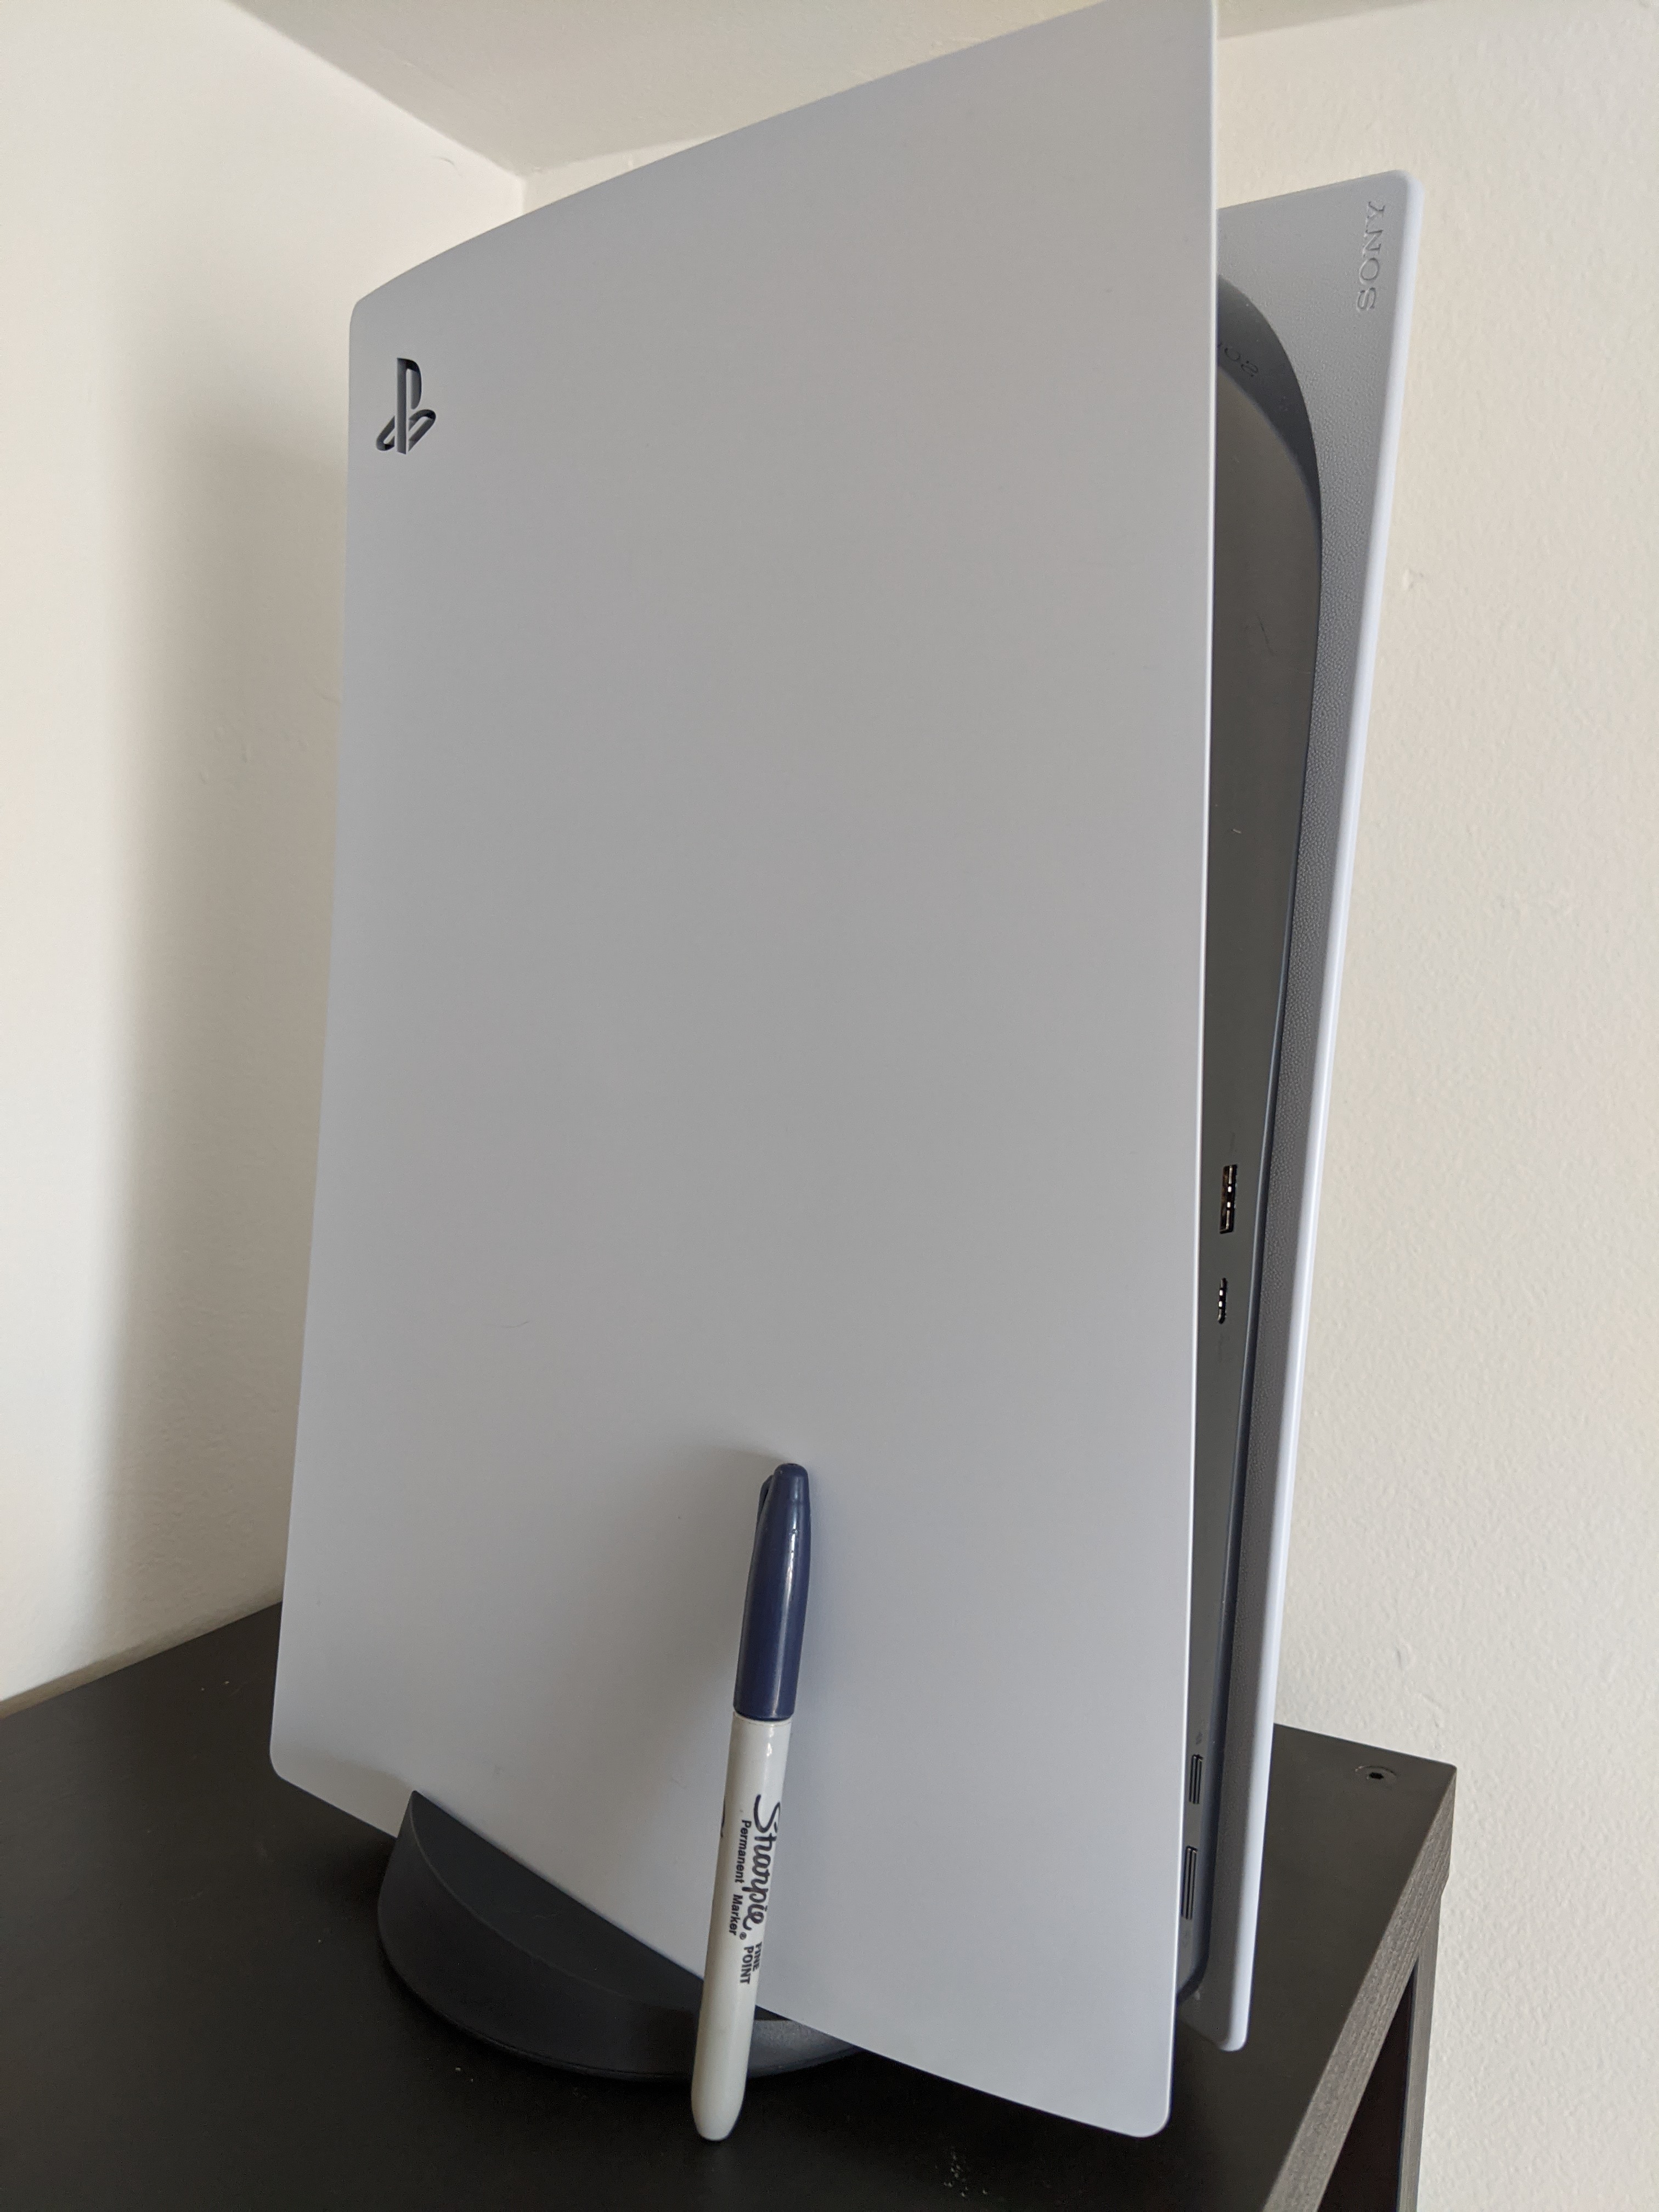 PS5 Next to a Sharpie